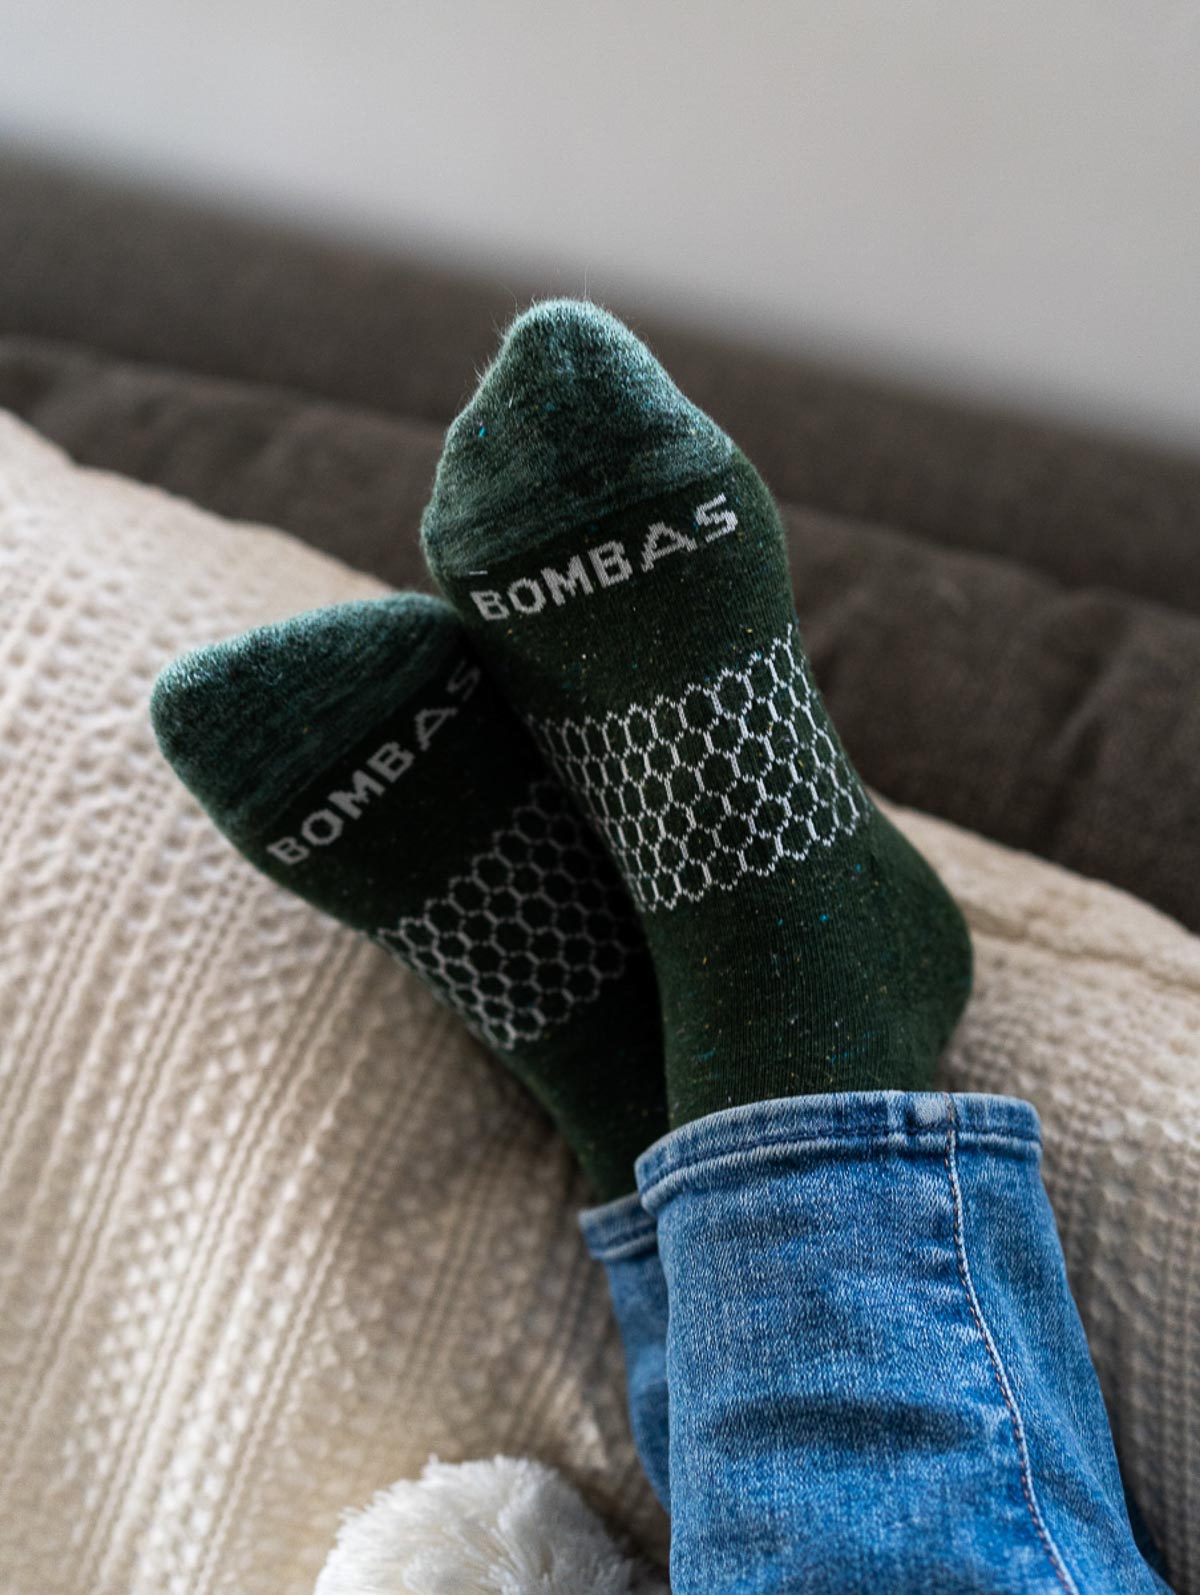 Bombas Socks - Style & Comfort for a Cause {Review} - The